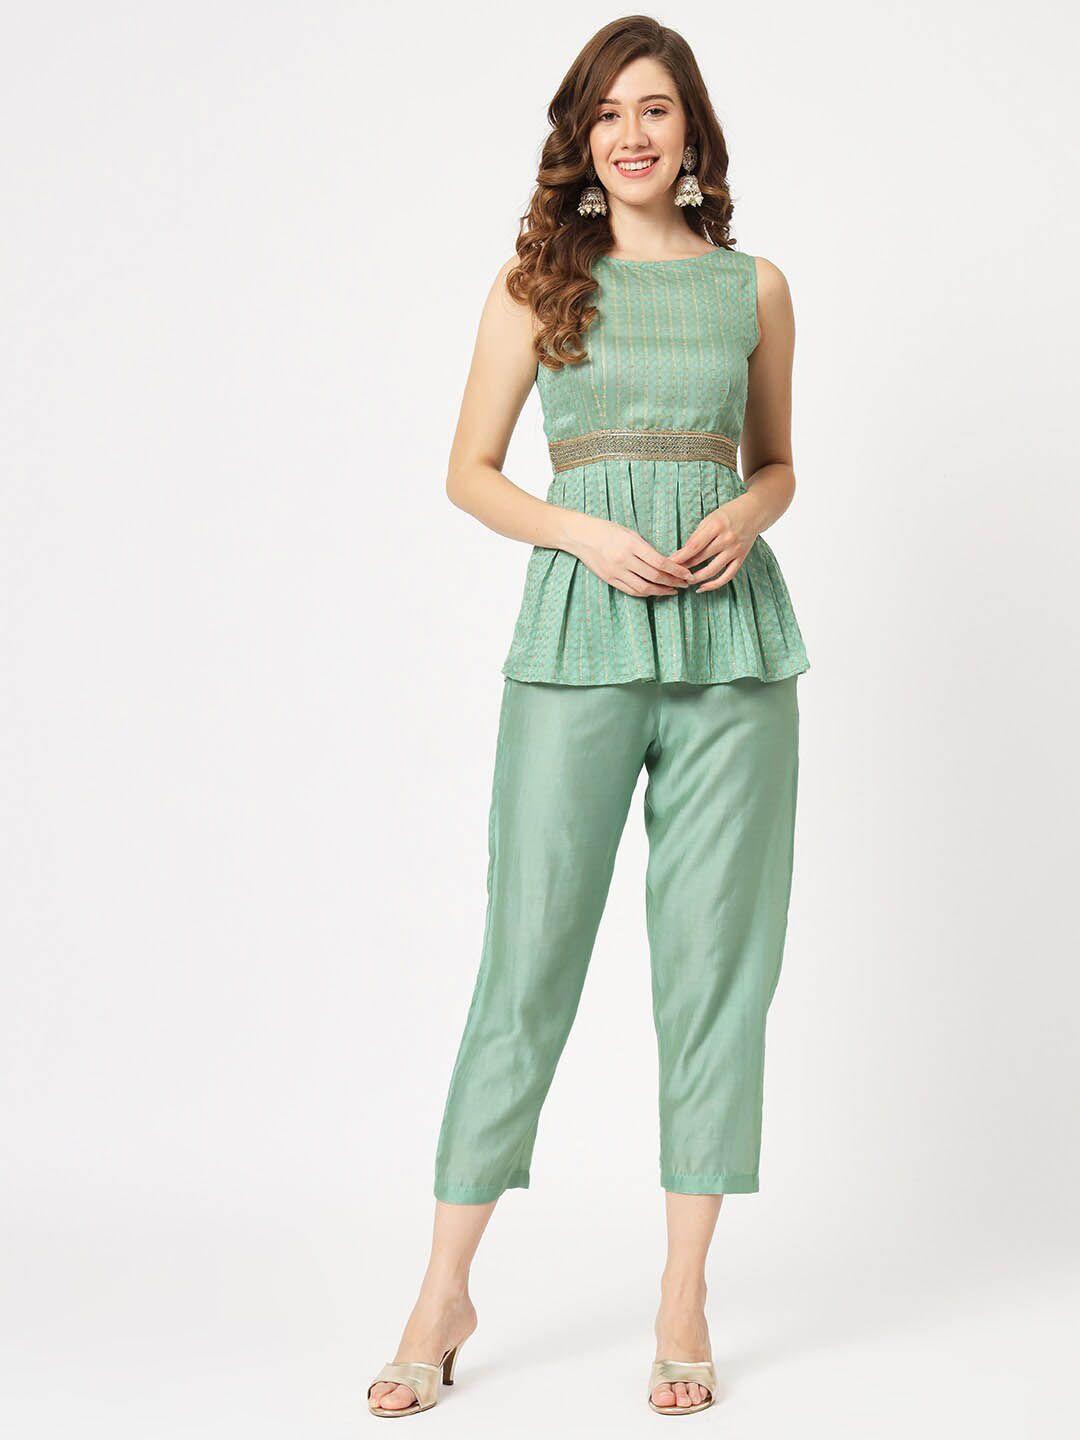 pannkh self-embellished pleated peplum top with trouser co-ords